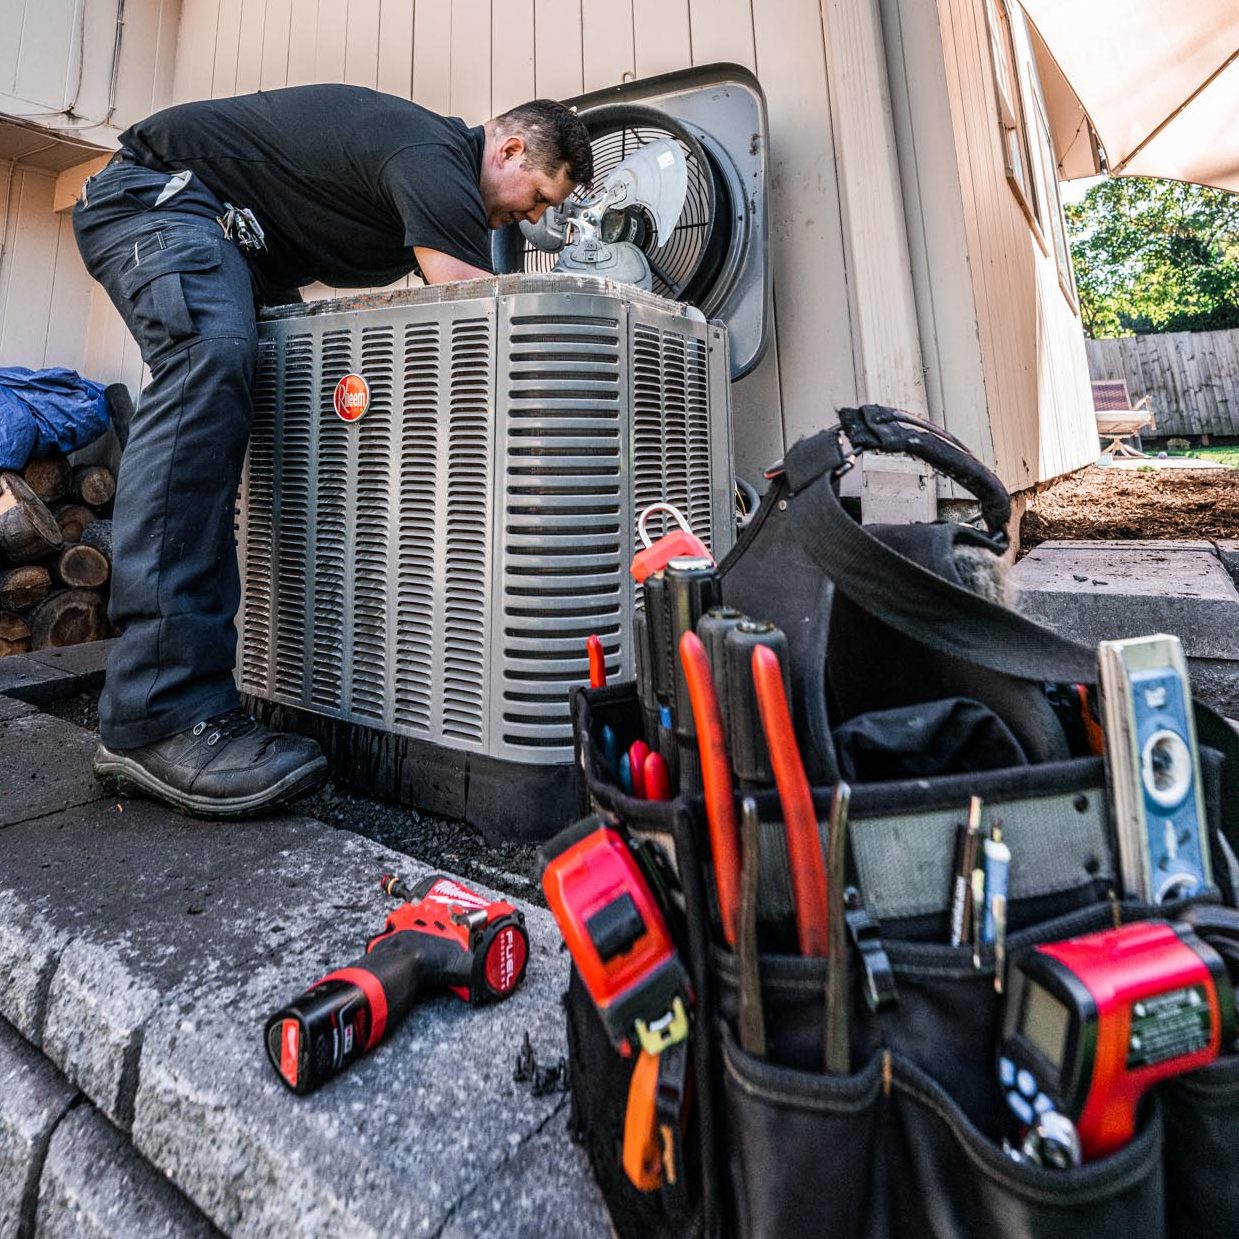 AC replacement and installation in Portland, OR with Cornel's Plumbing, Heating & Air.